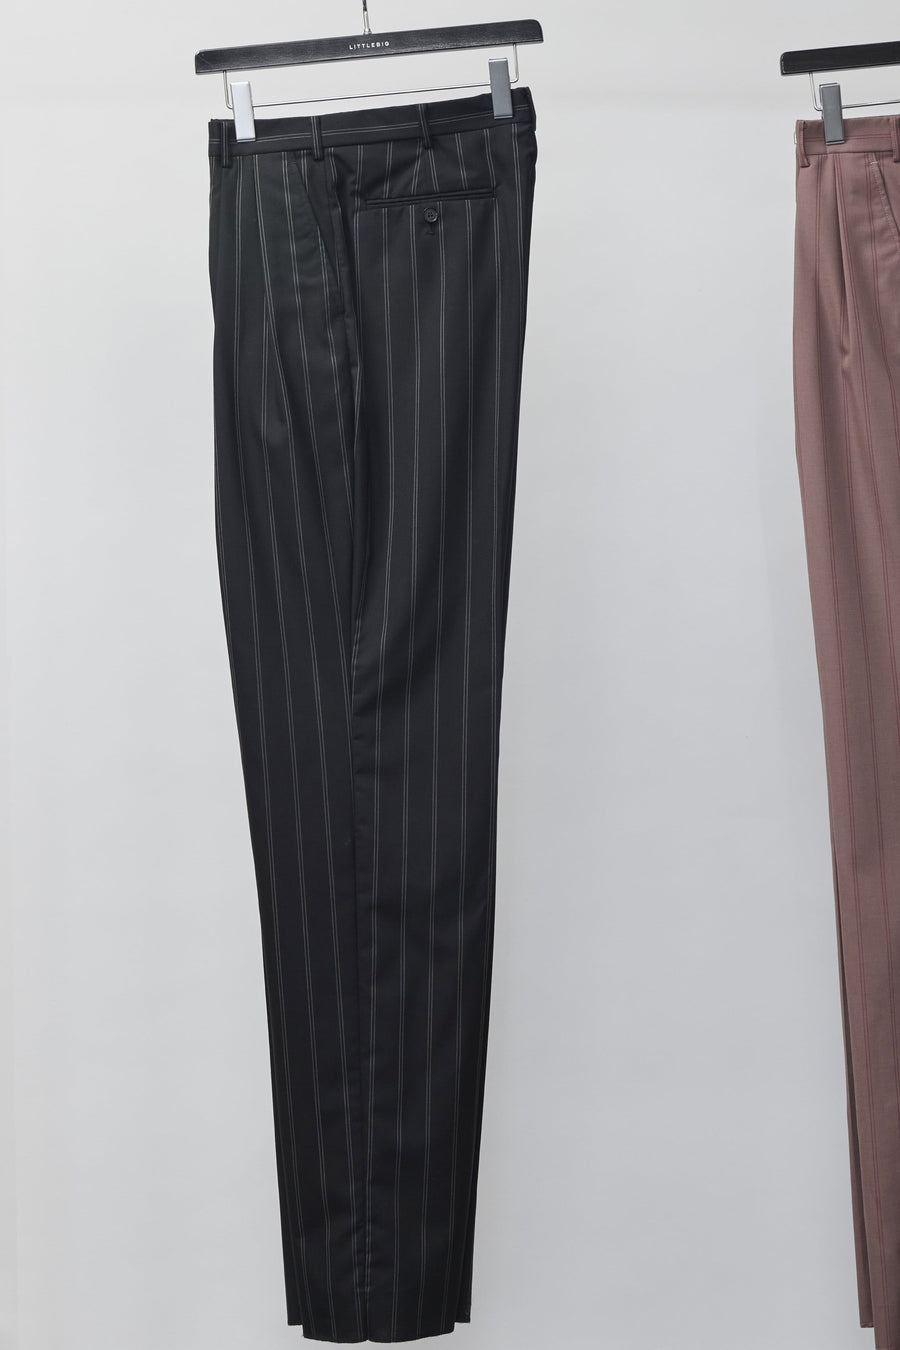 LITTLEBIG  Tucked Tapered Trousers（Black）